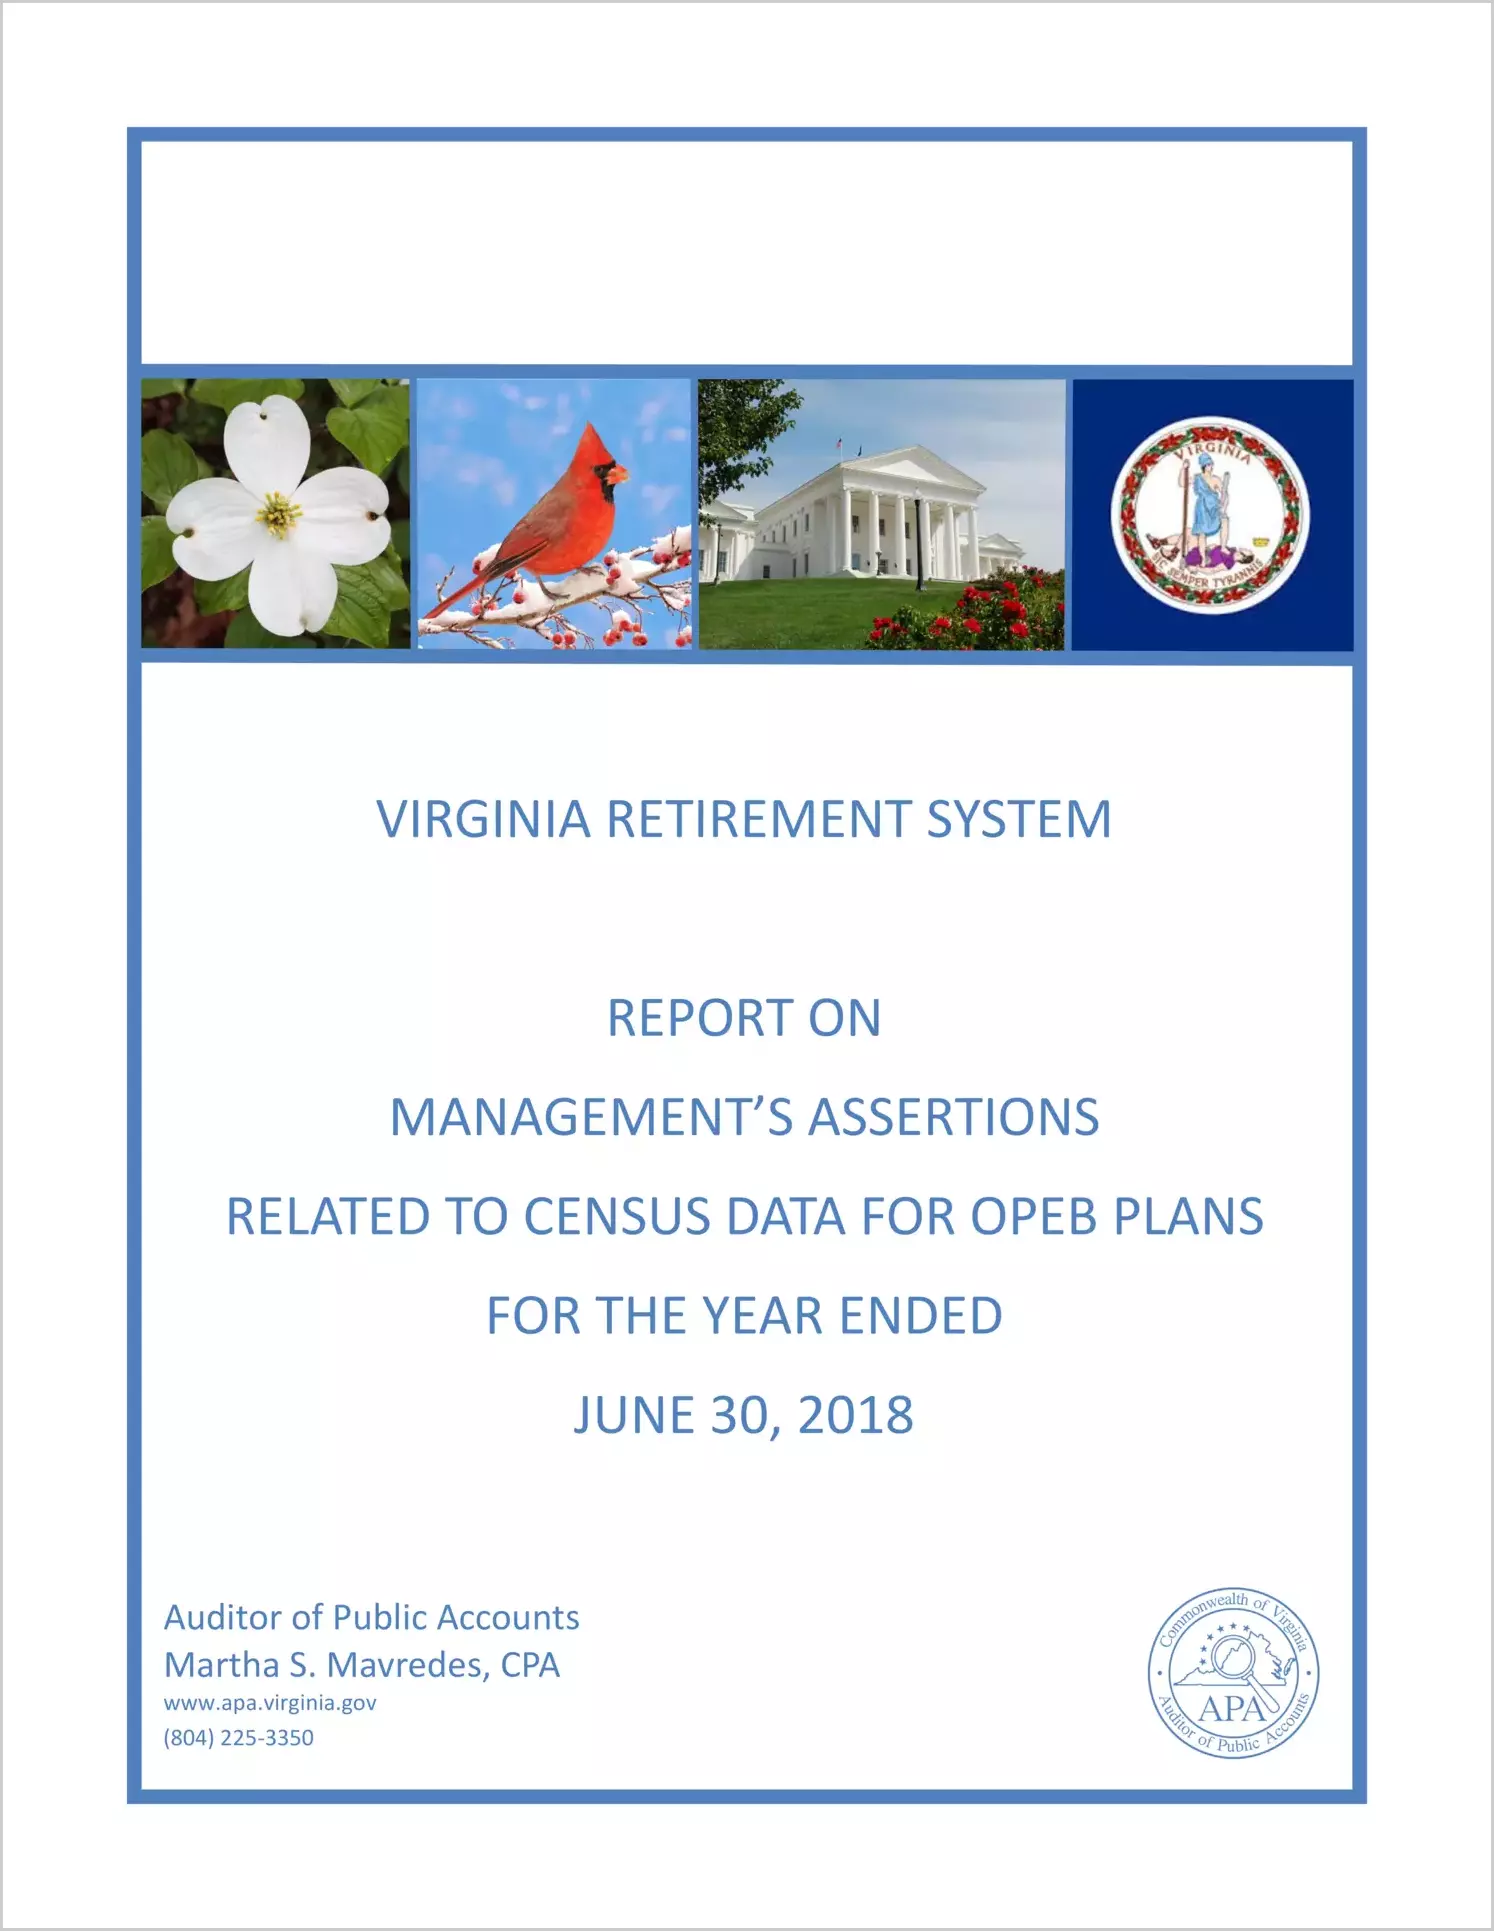 Virginia Retirement System Management's Assertions Related to Census Data for OPEB Plans for the year ended June 30, 2018